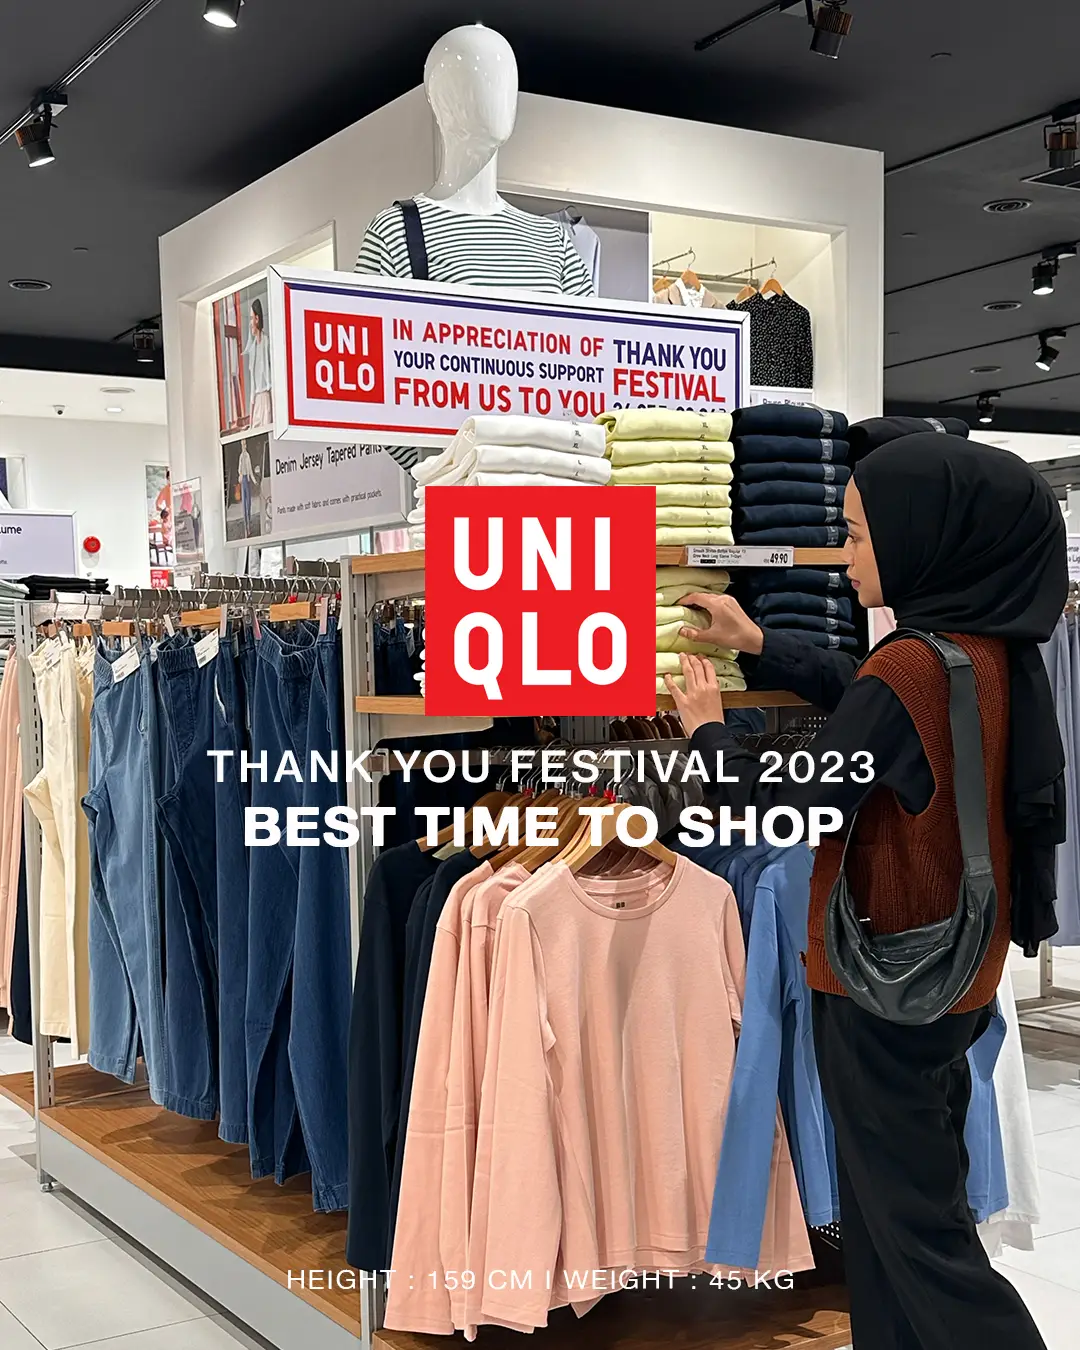 Uniqlo Singapore - The trendy Women's jogger pants are back in more designs  - this time in Denim and soft Ponte material! Jogger Pants are retailing at  $49.90. See the entire range